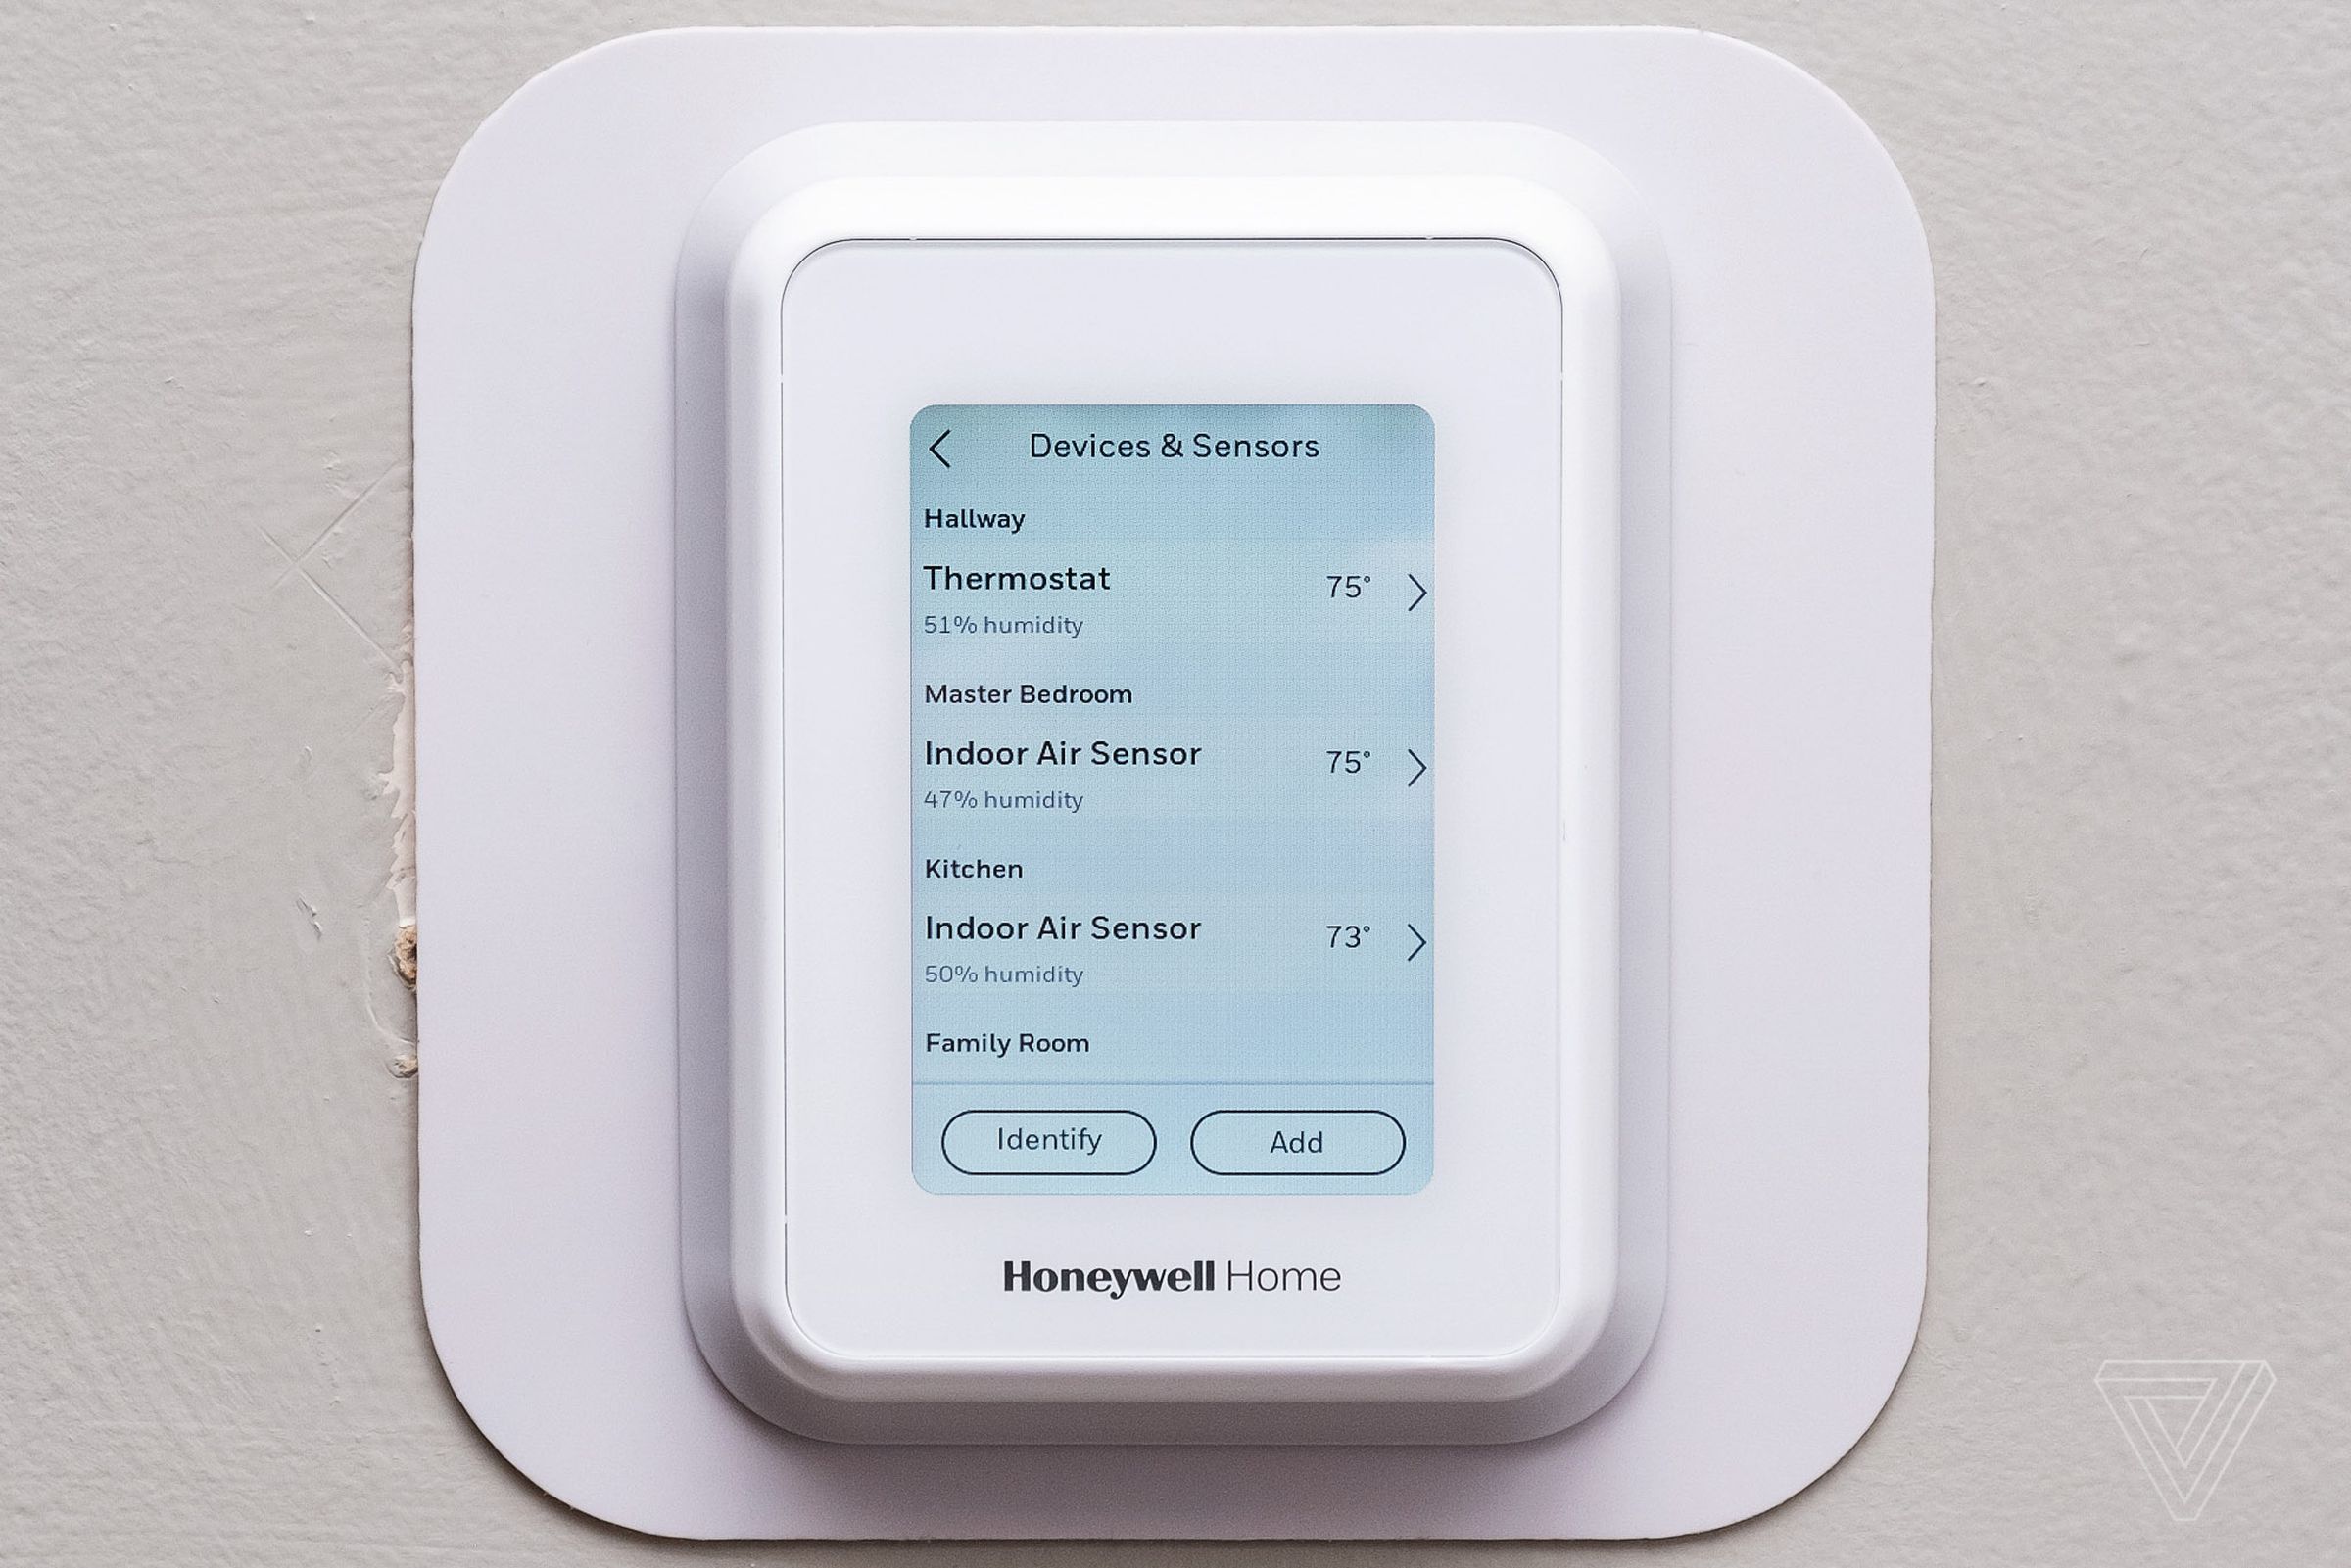 You can link up to 20 remote sensors to one T9 thermostat and program it based on what they are reading.